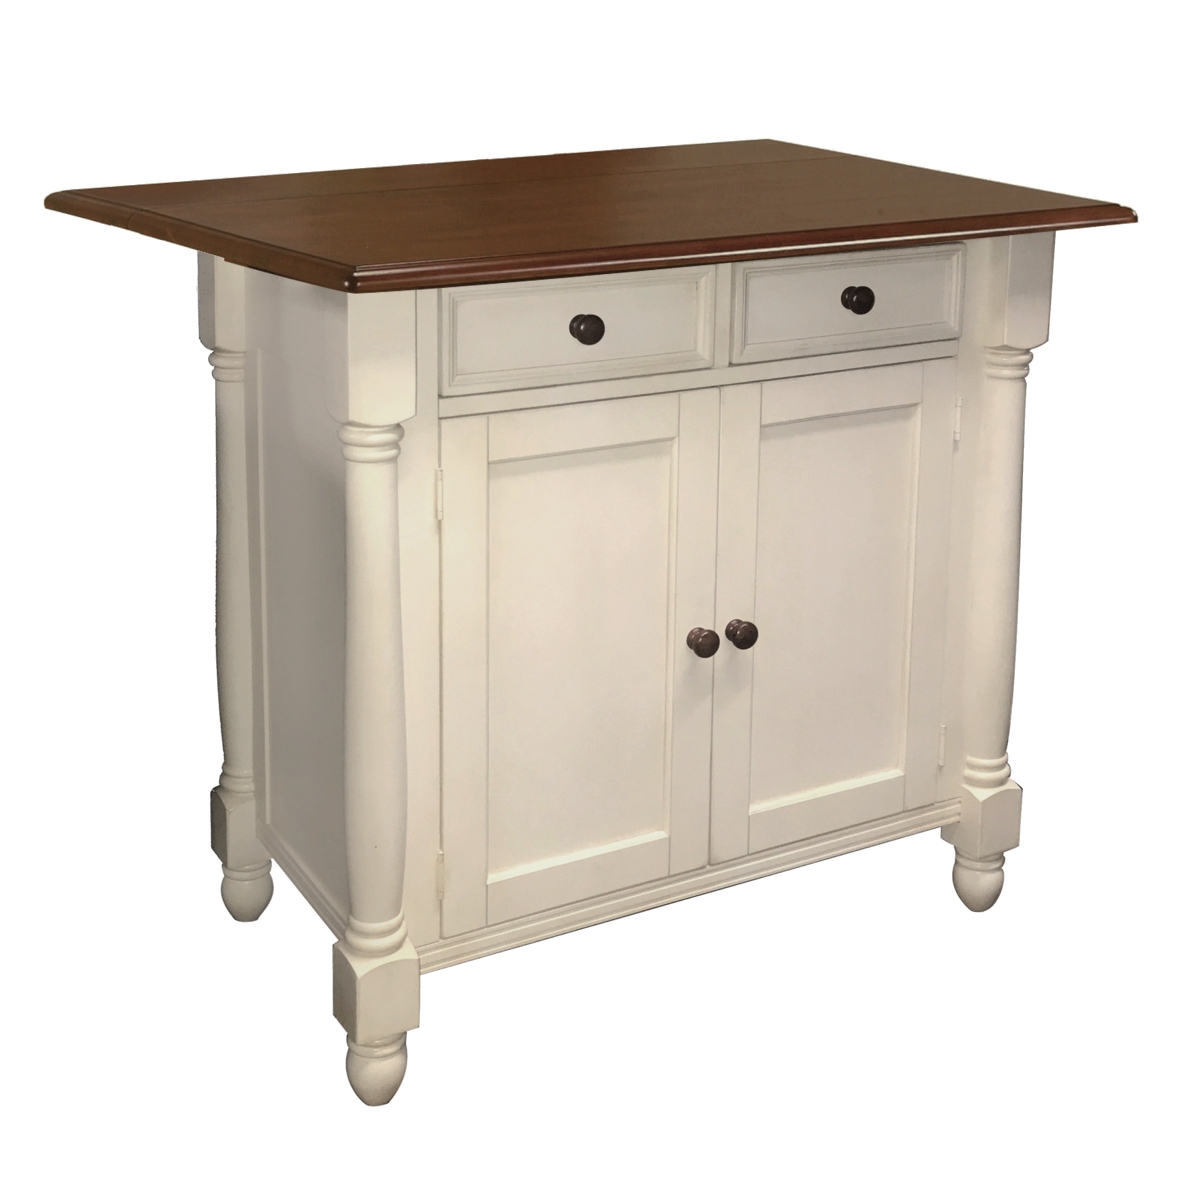 Picture of Sunset Trading Andrews Drop Leaf Kitchen Island Drawers &amp; Cabinet - Antique White &amp; Chestnut